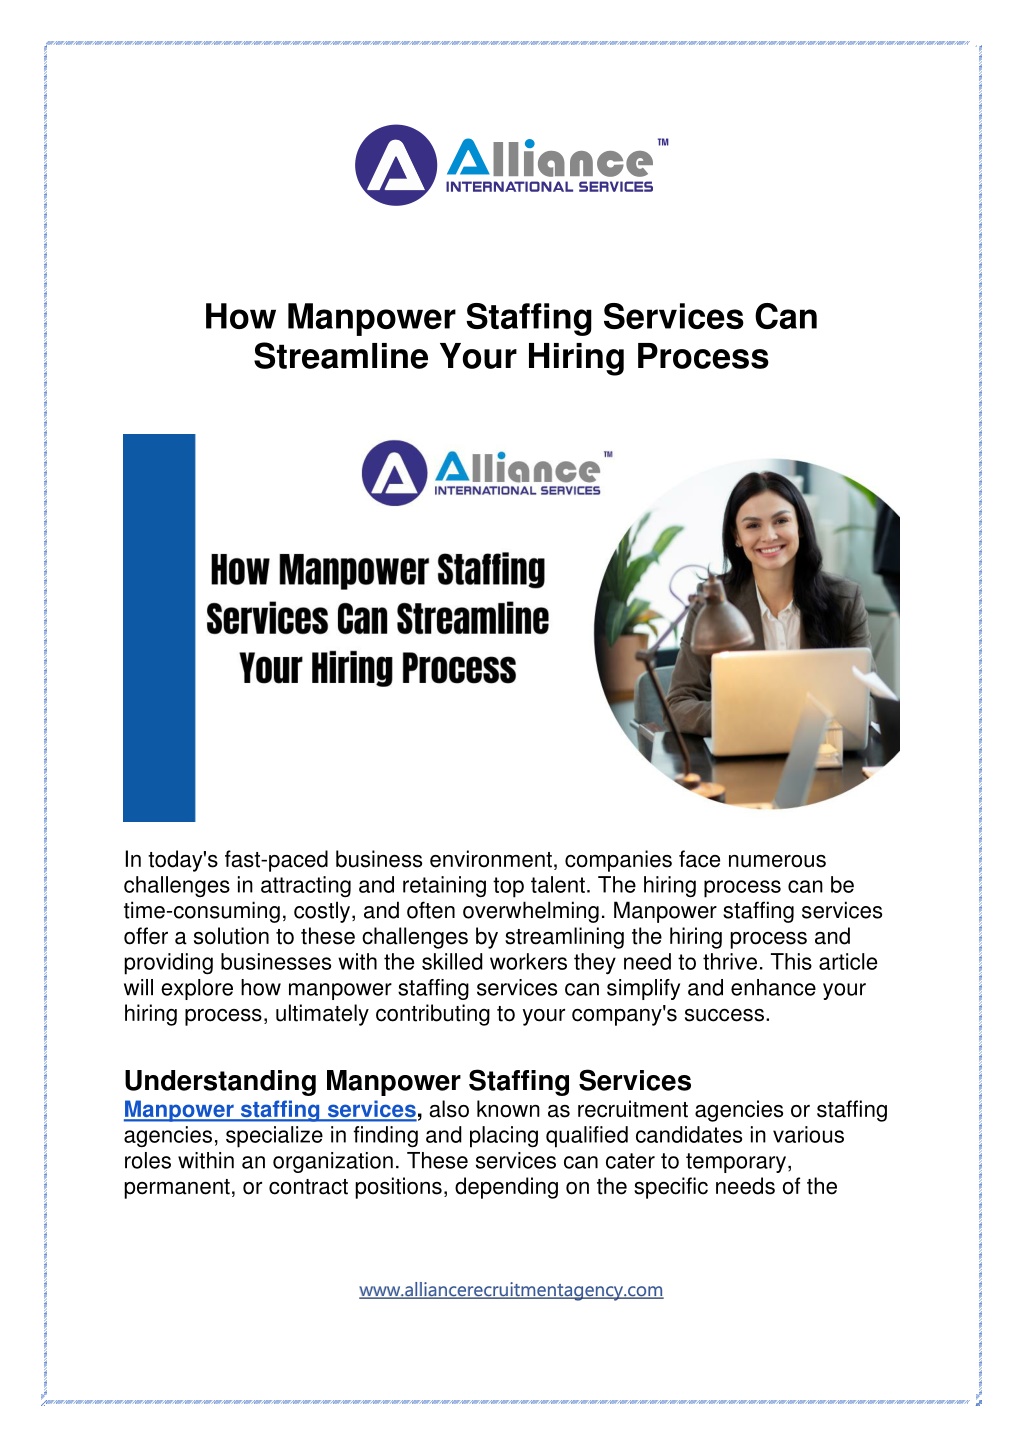 how manpower staffing services can streamline l.w